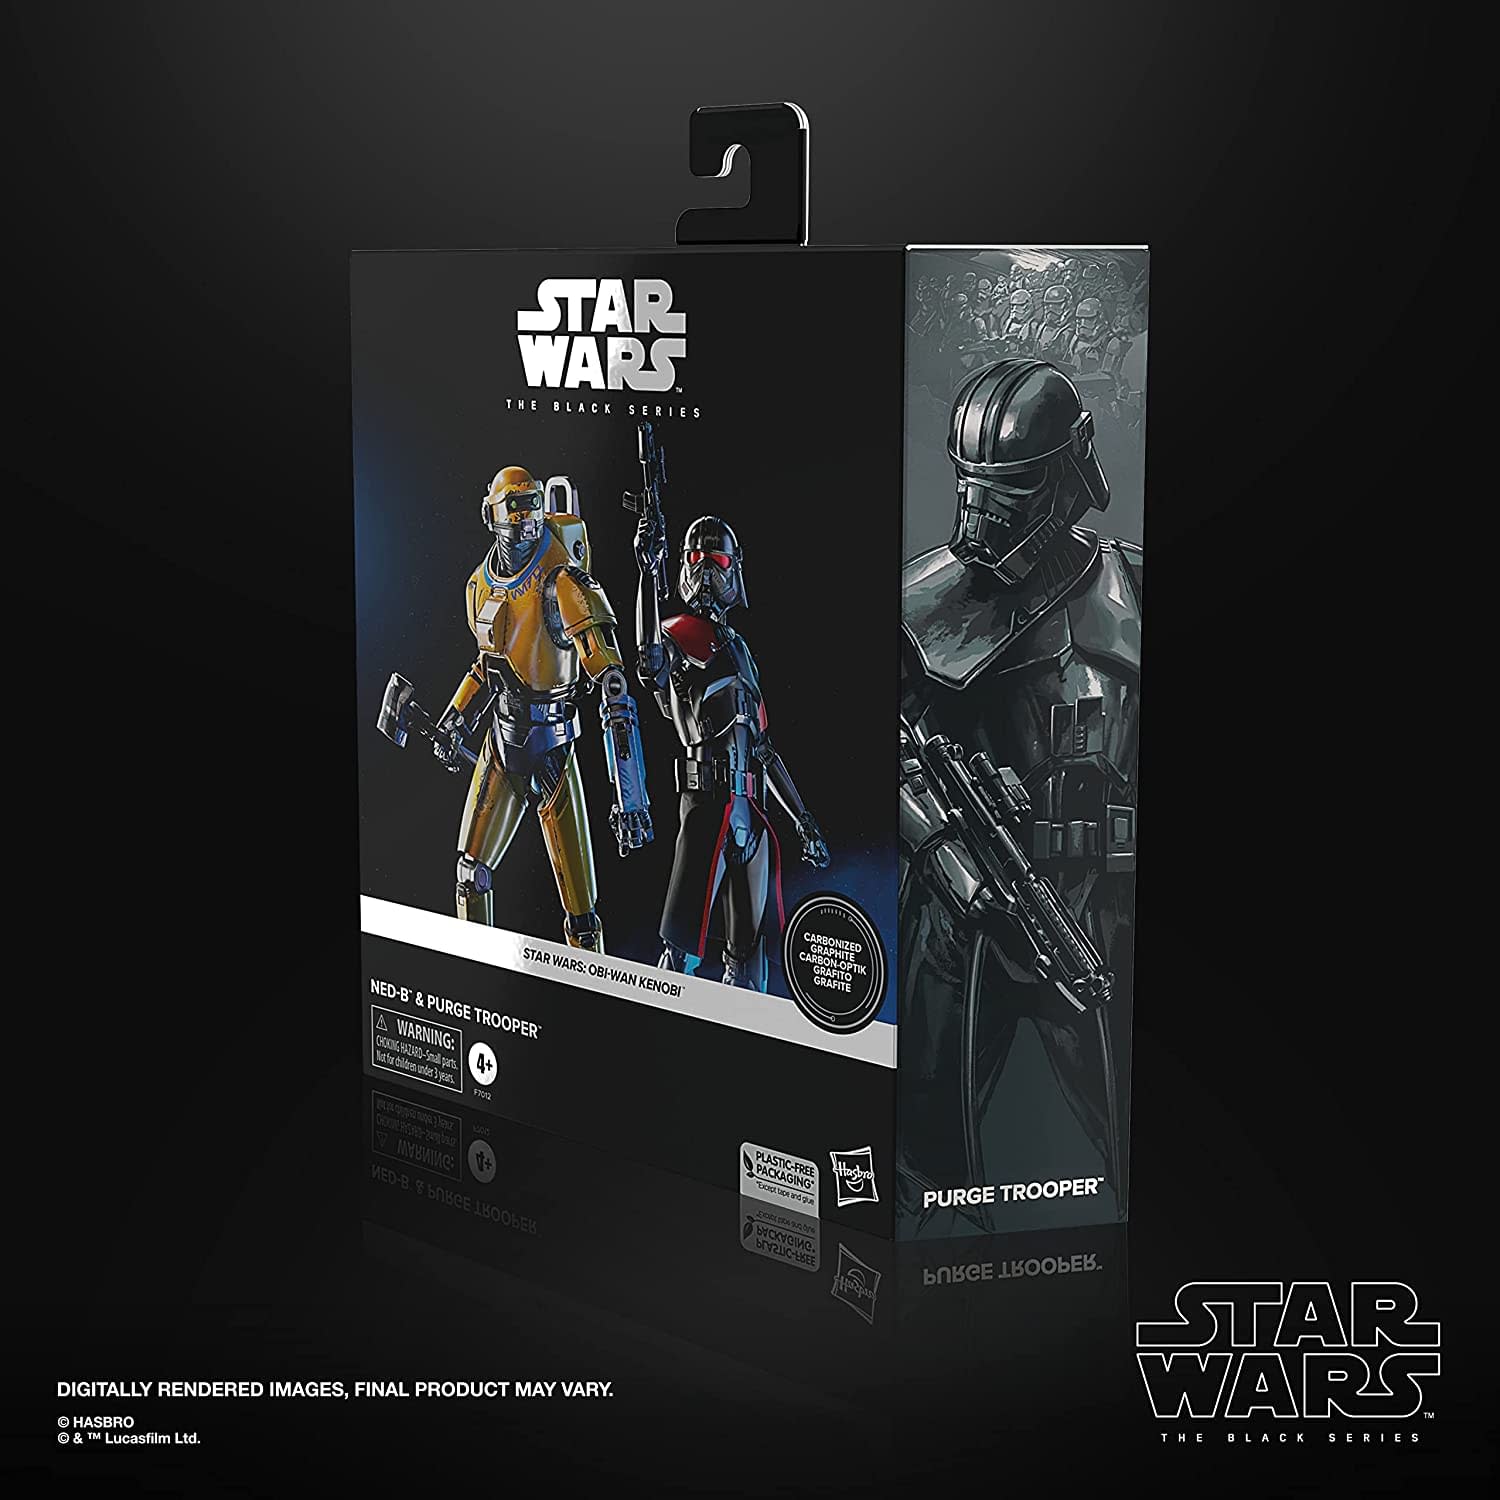 Hasbro Loses Their Minds By Dropping $75 Carbonized Star Wars 2-Pack